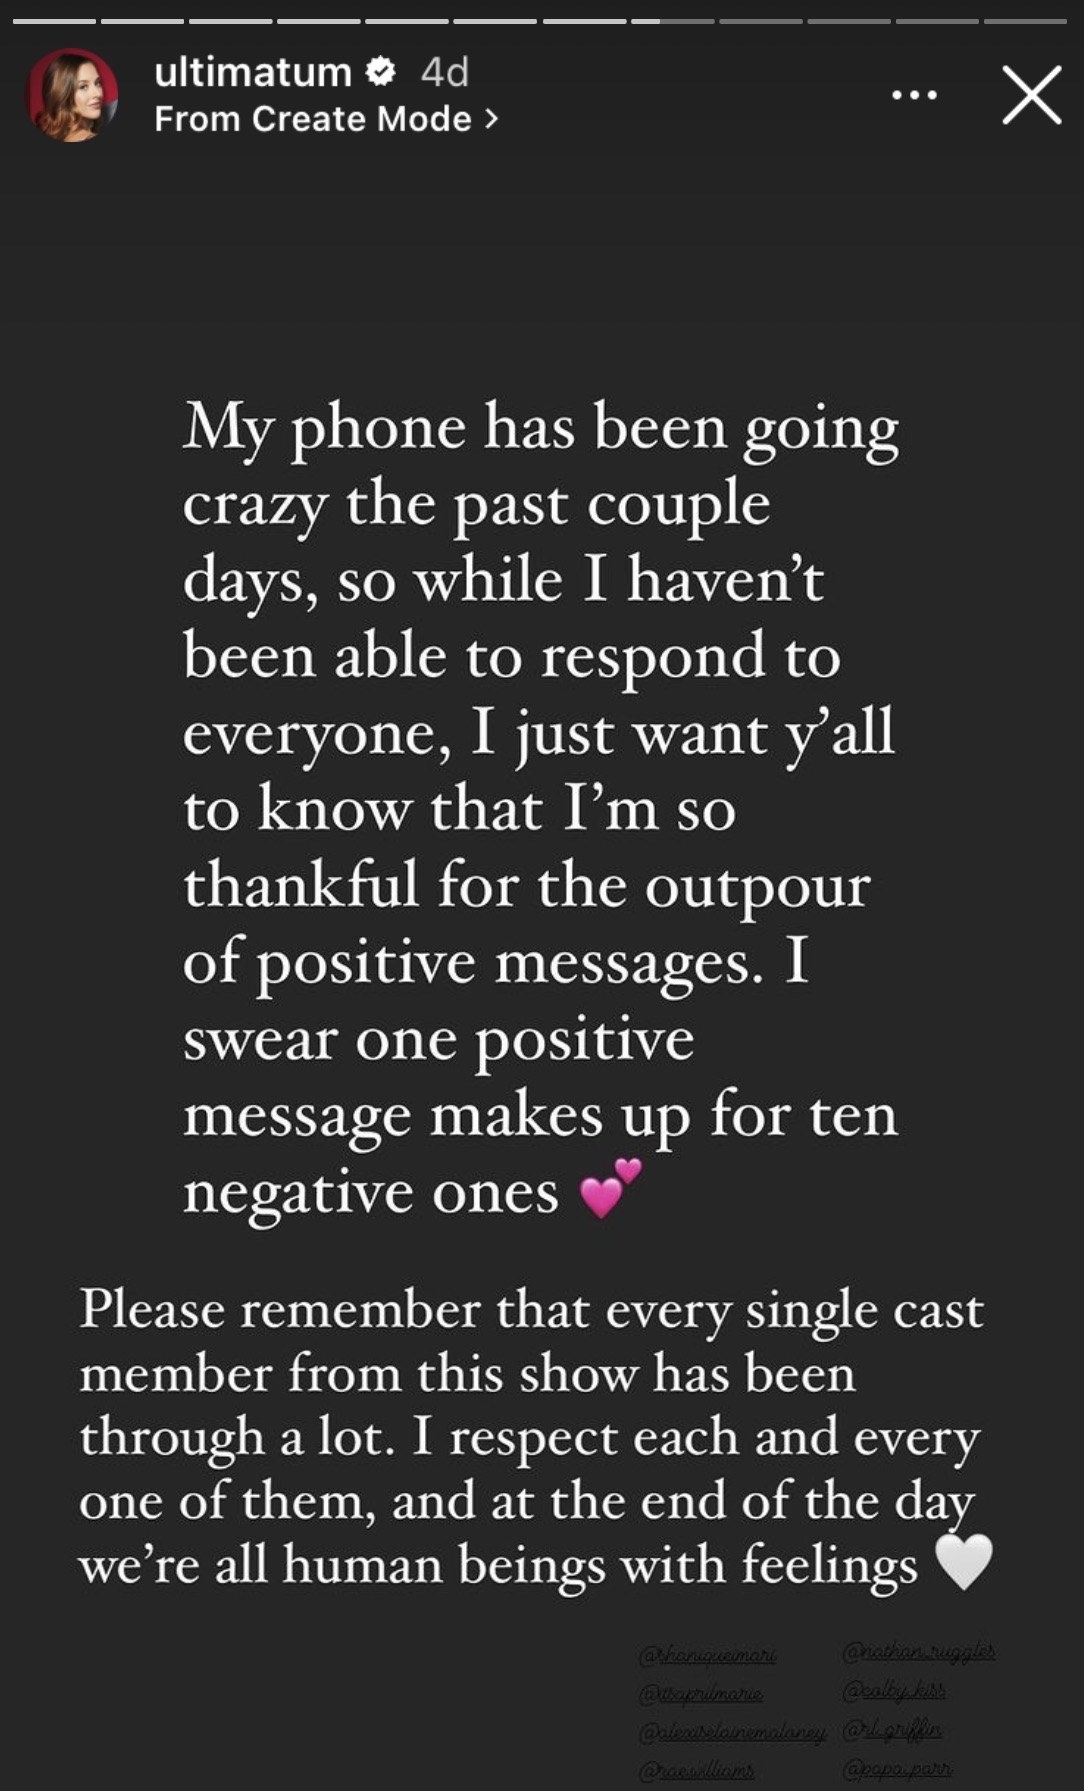 Lauren posts a message thanking fans for their support to Instagram Stories and tags fellow participants from &quot;The Ultimatum&quot;